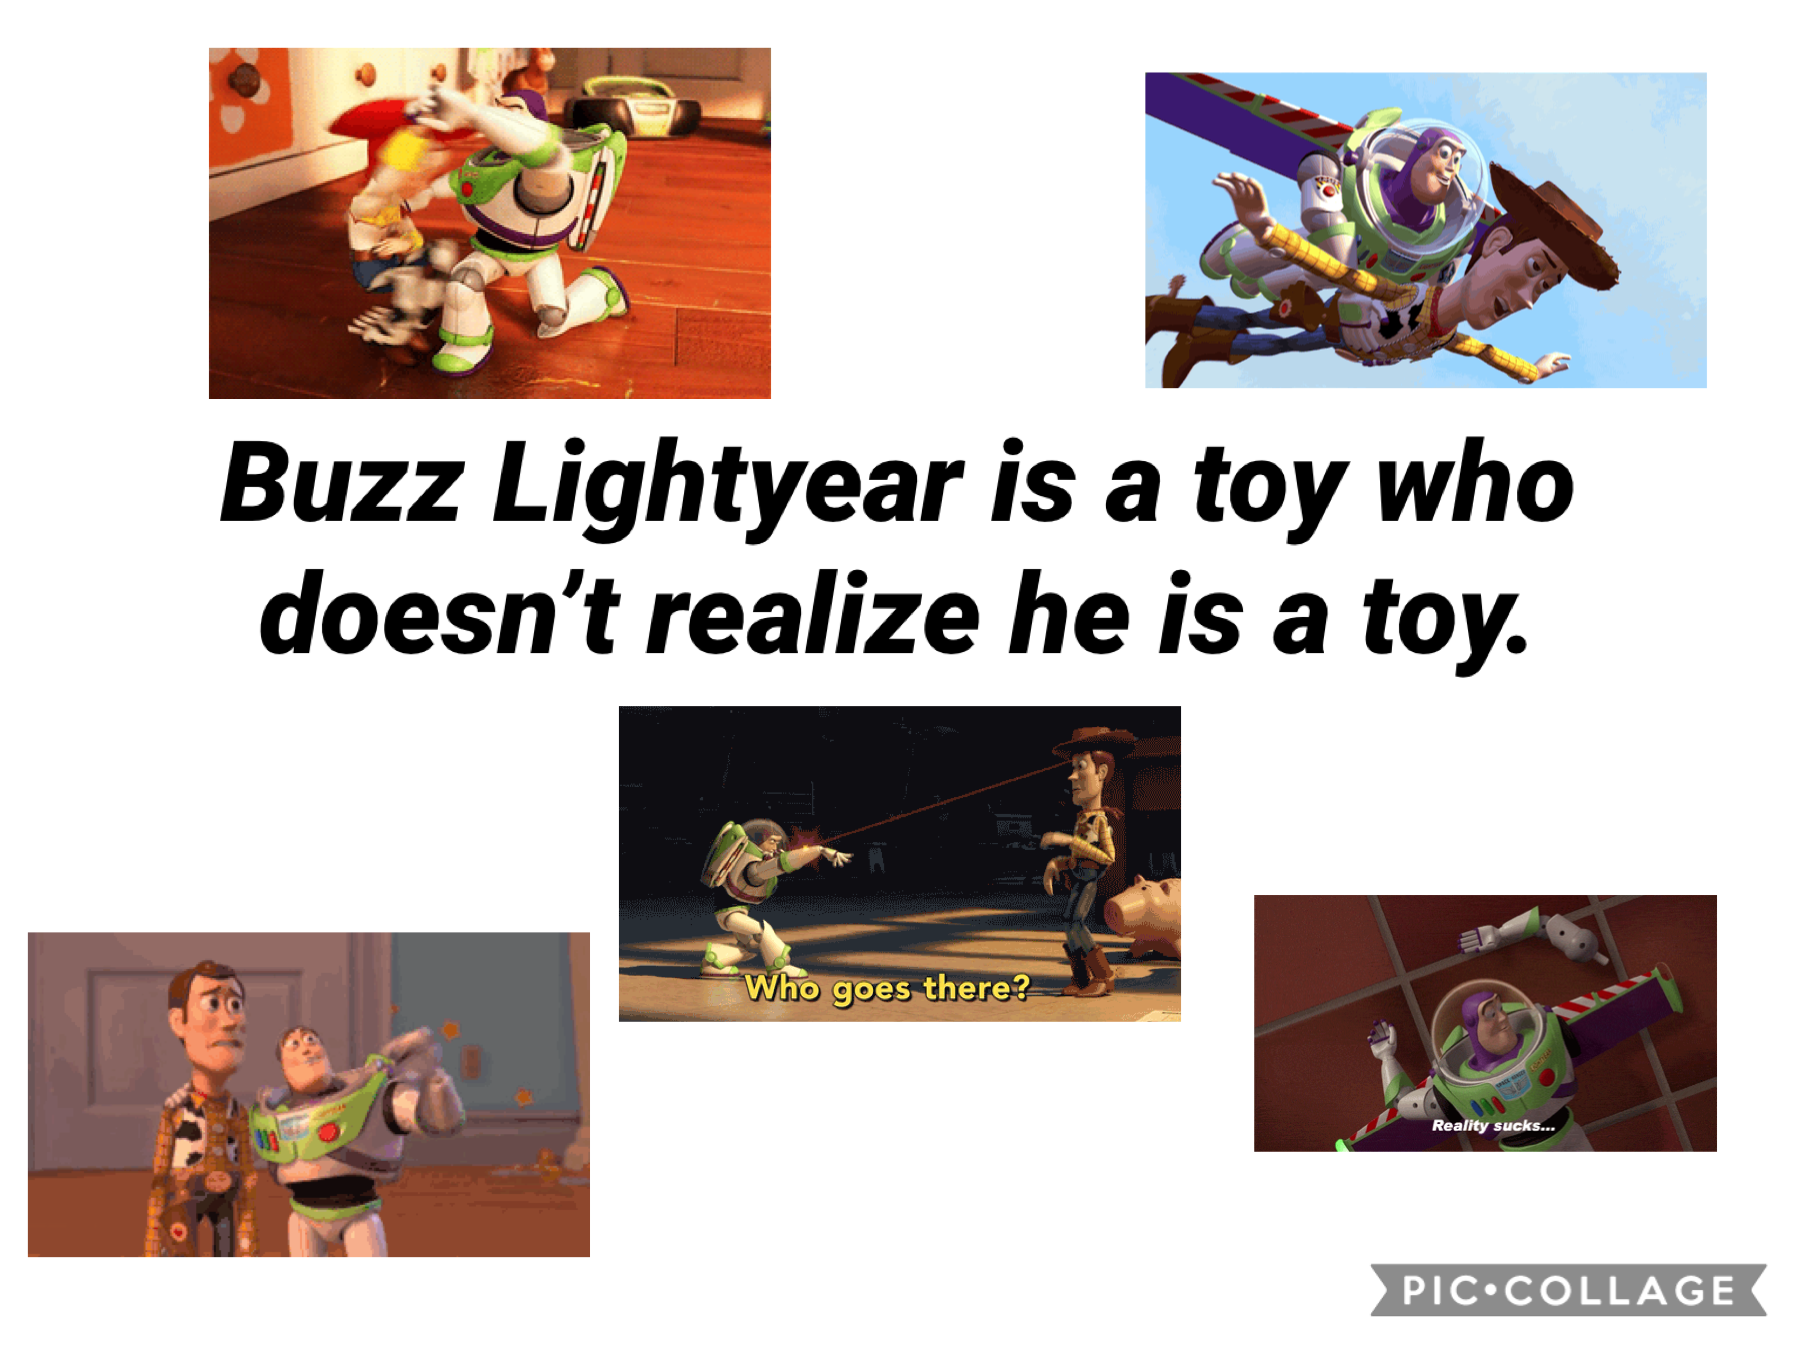 Buzz Lightyear is a toy who doesn’t realize he is a toy.